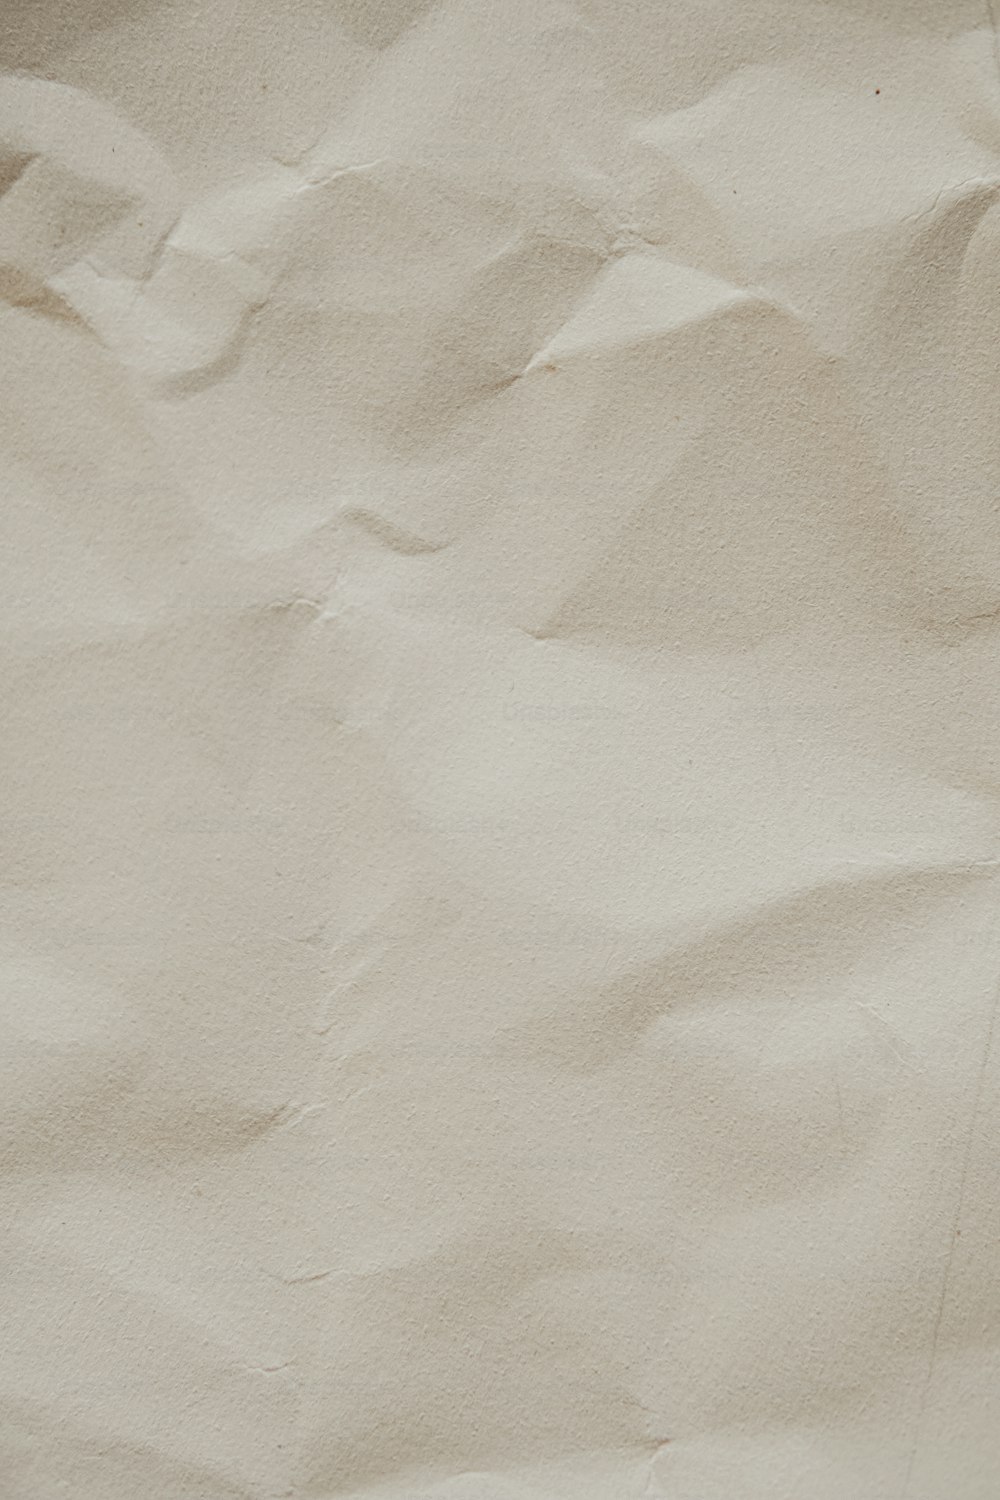 File:Free dark crumpled paper texture for layers (2984774568).jpg -  Wikimedia Commons